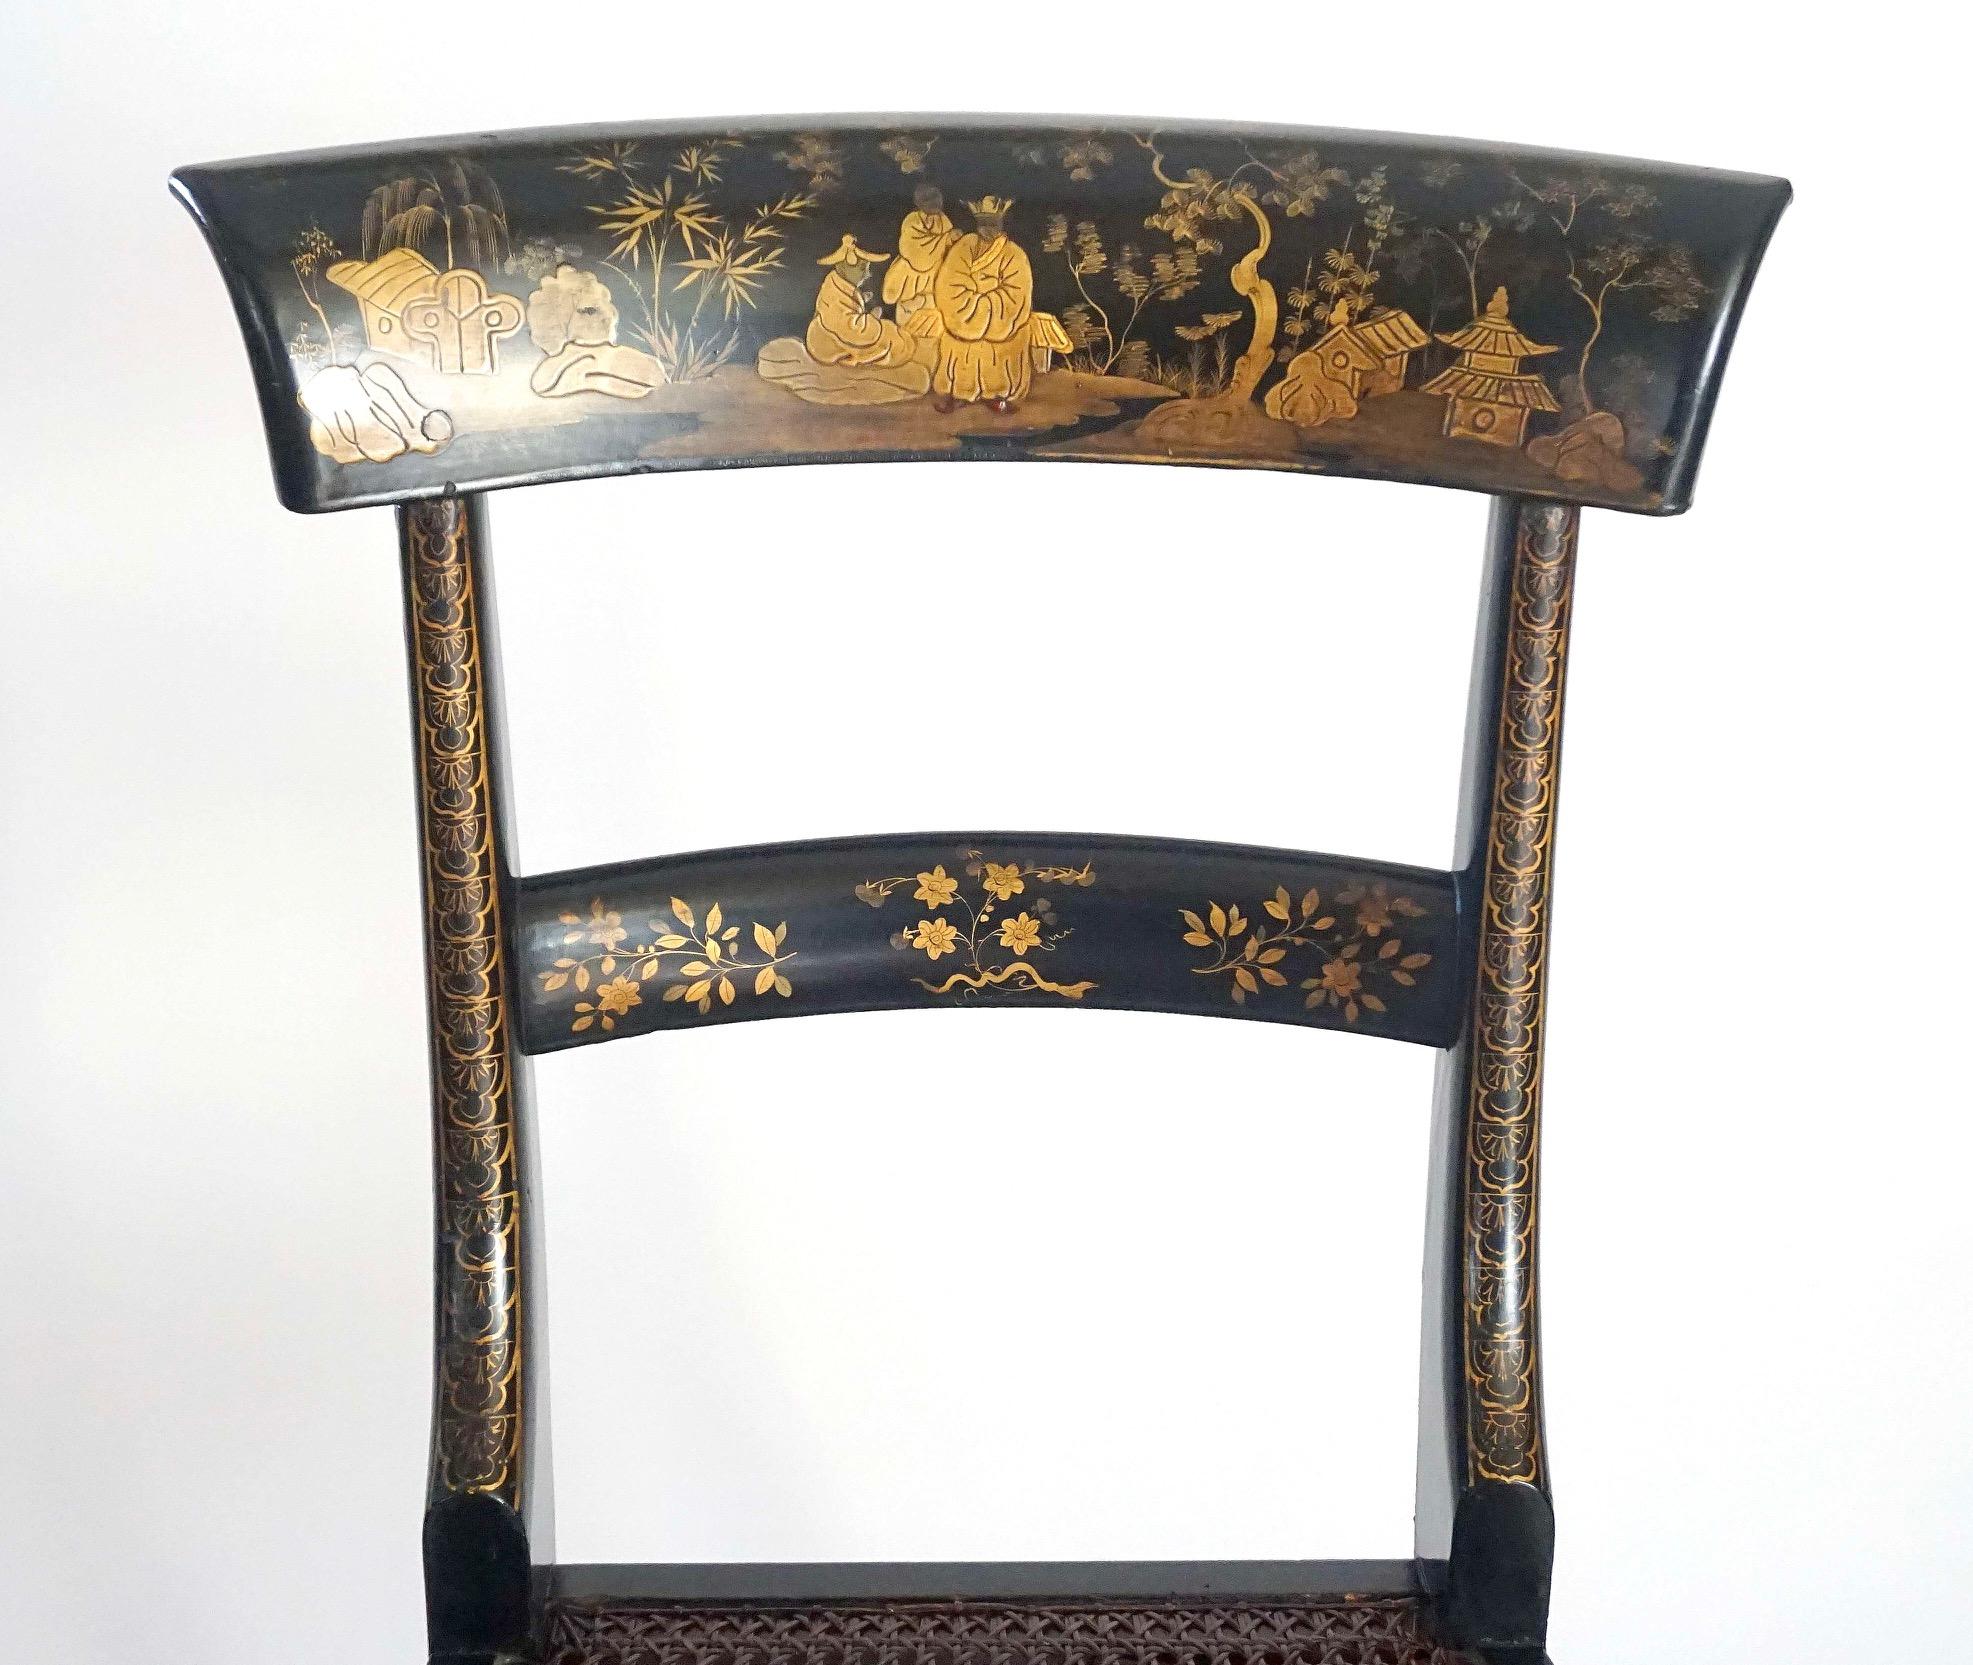 English Chinoiserie Chairs, Ex-Garvan Collection Yale University, circa 1835 For Sale 2